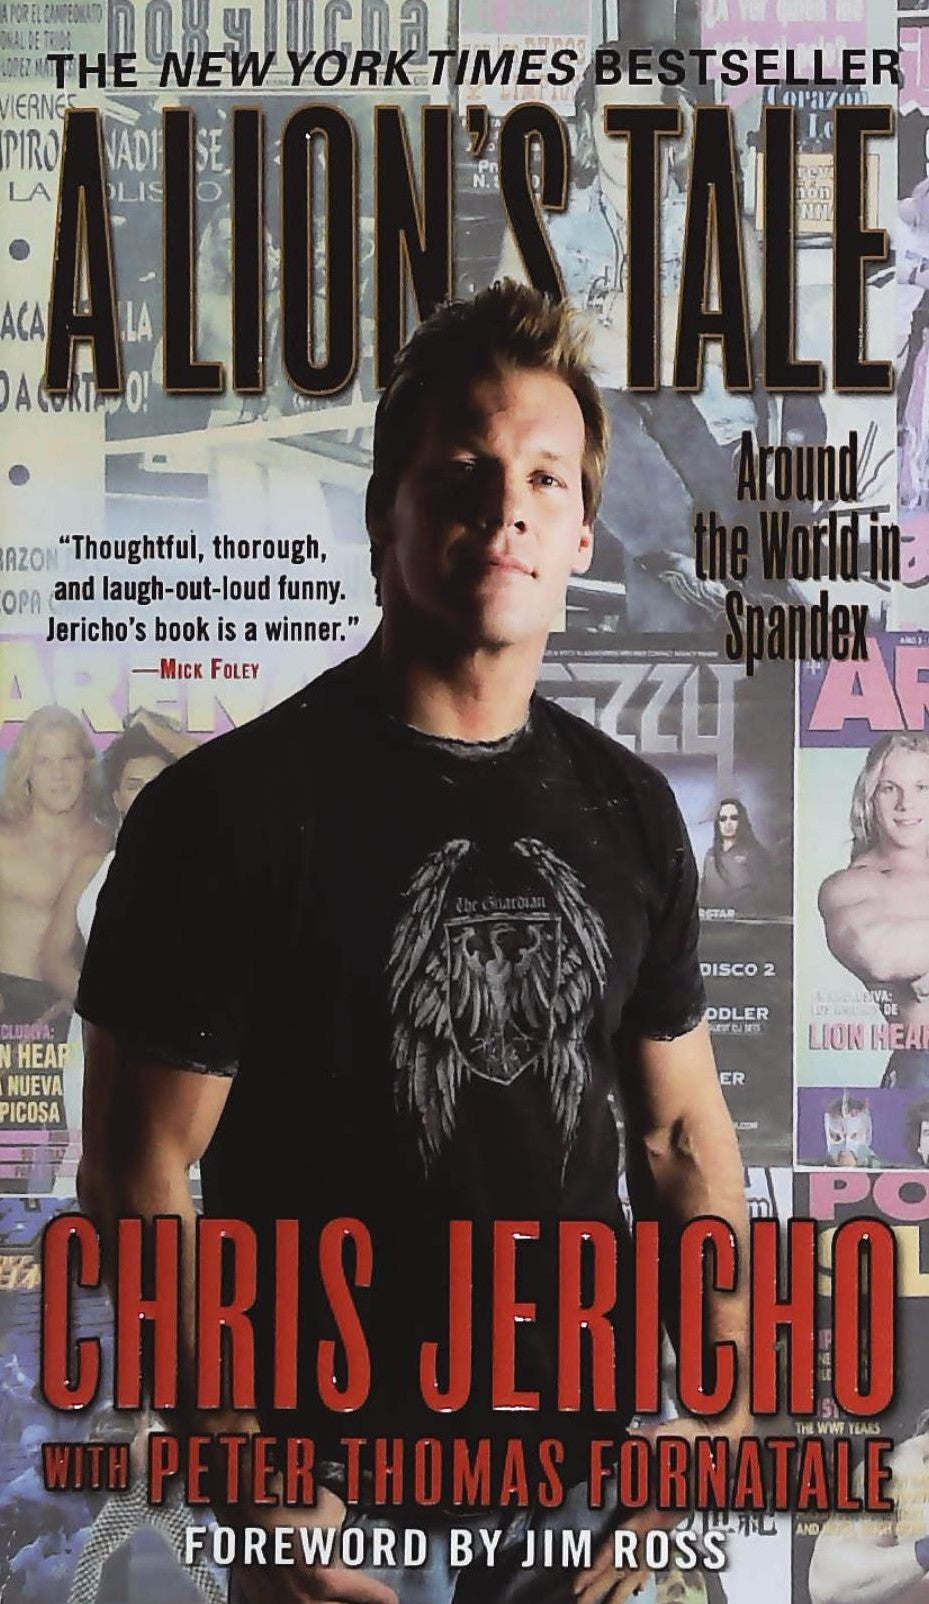 Livre ISBN 044669861X A Lion's Tale: Around the World in Spandex (Chris Jericho)